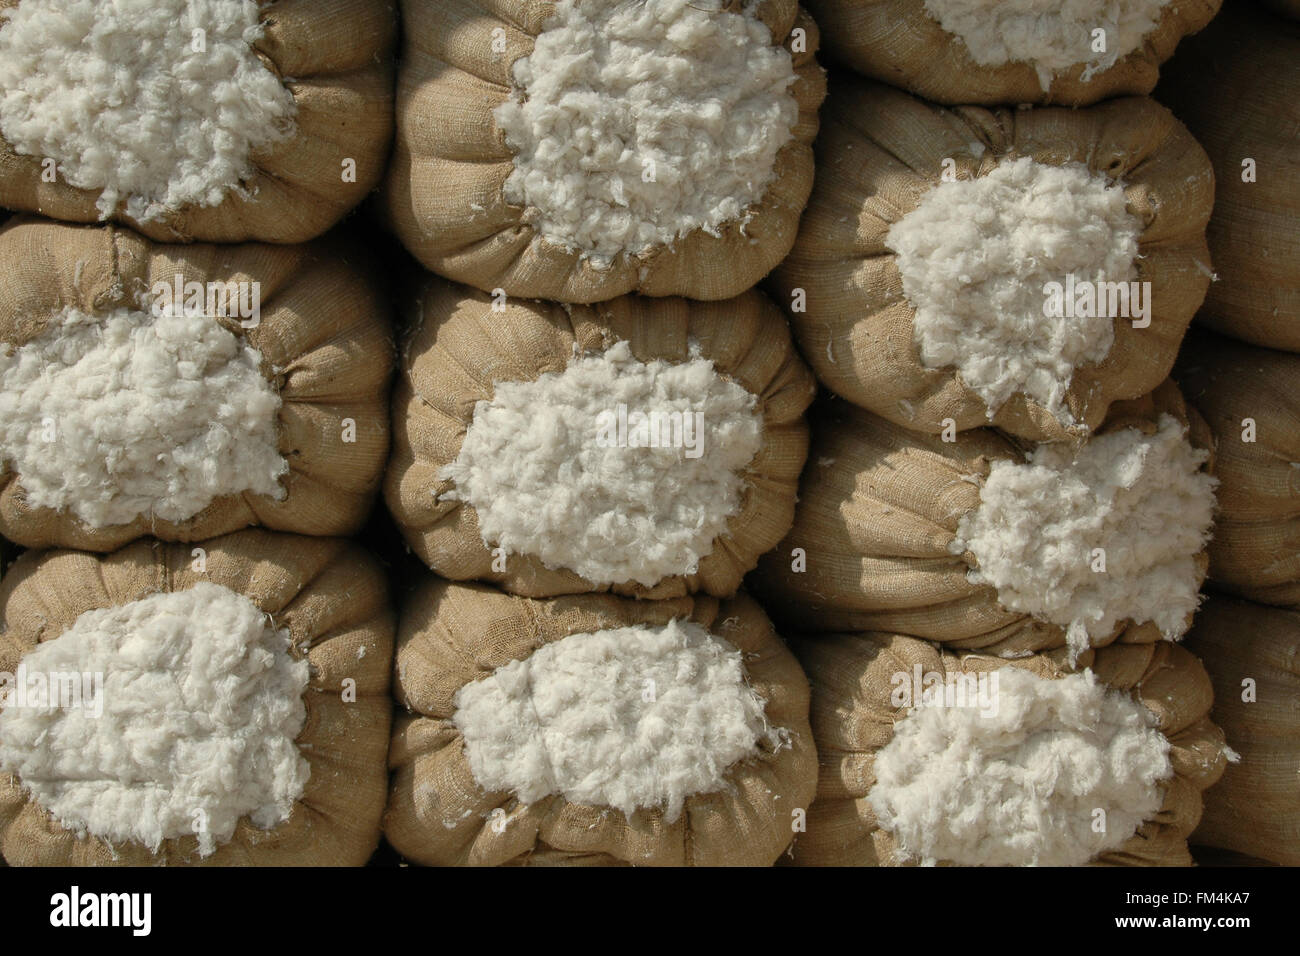 Pile of jute bags of harvested raw cotton bolls in the market, Old Cairo, Egypt Stock Photo